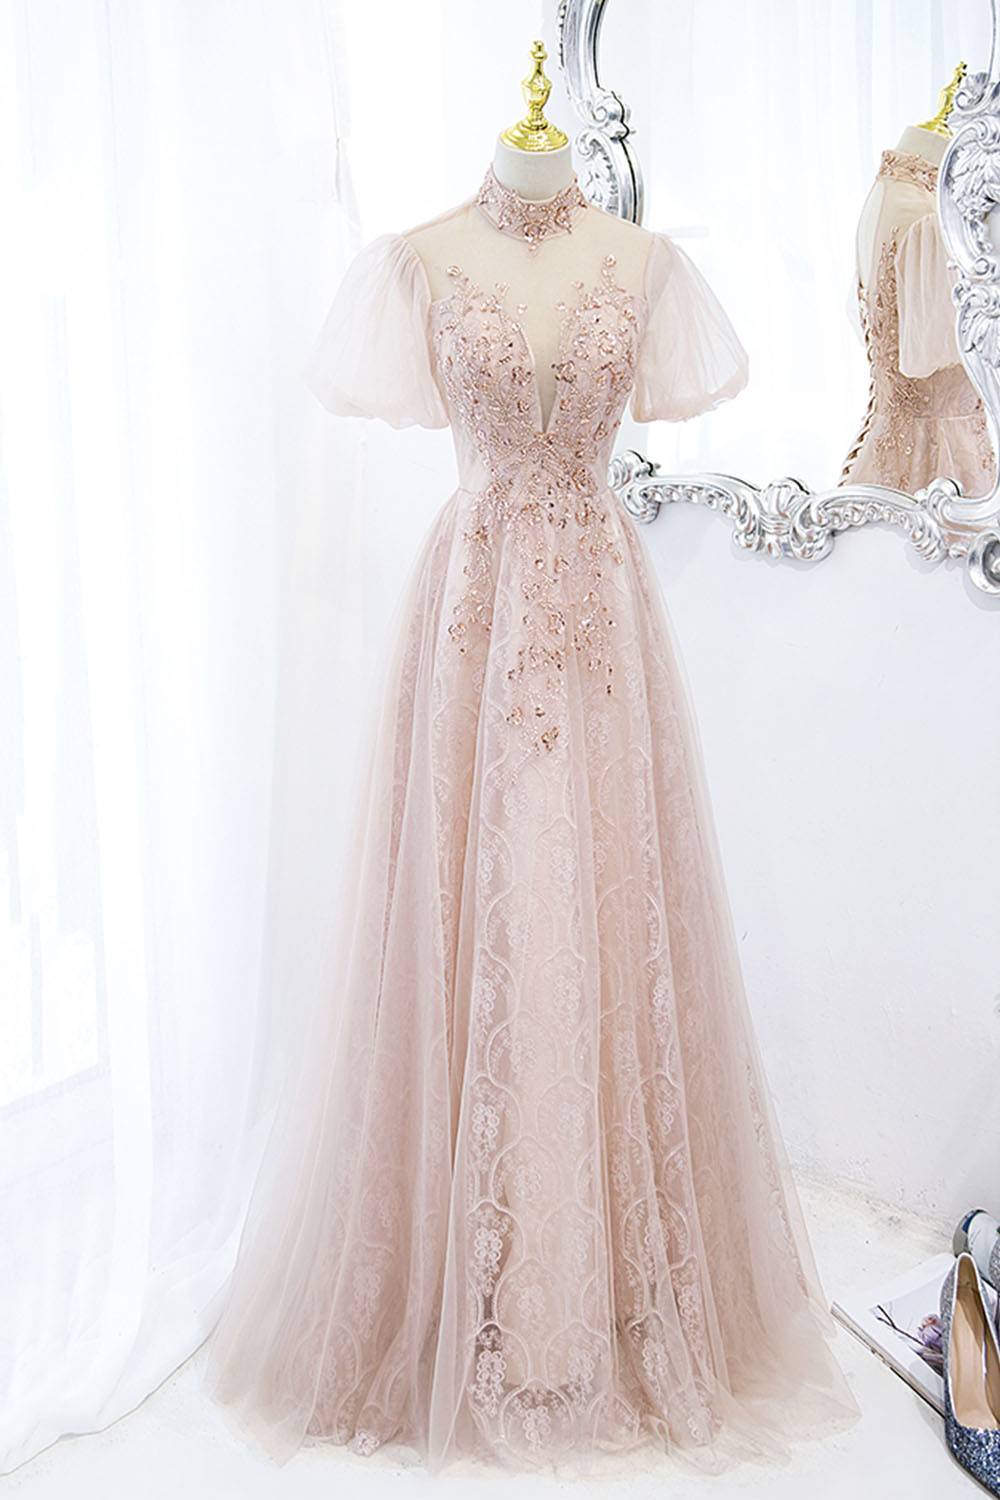 Pink Tulle Long A-Line Prom Dress, Pink Short Sleeve Evening Party Dress